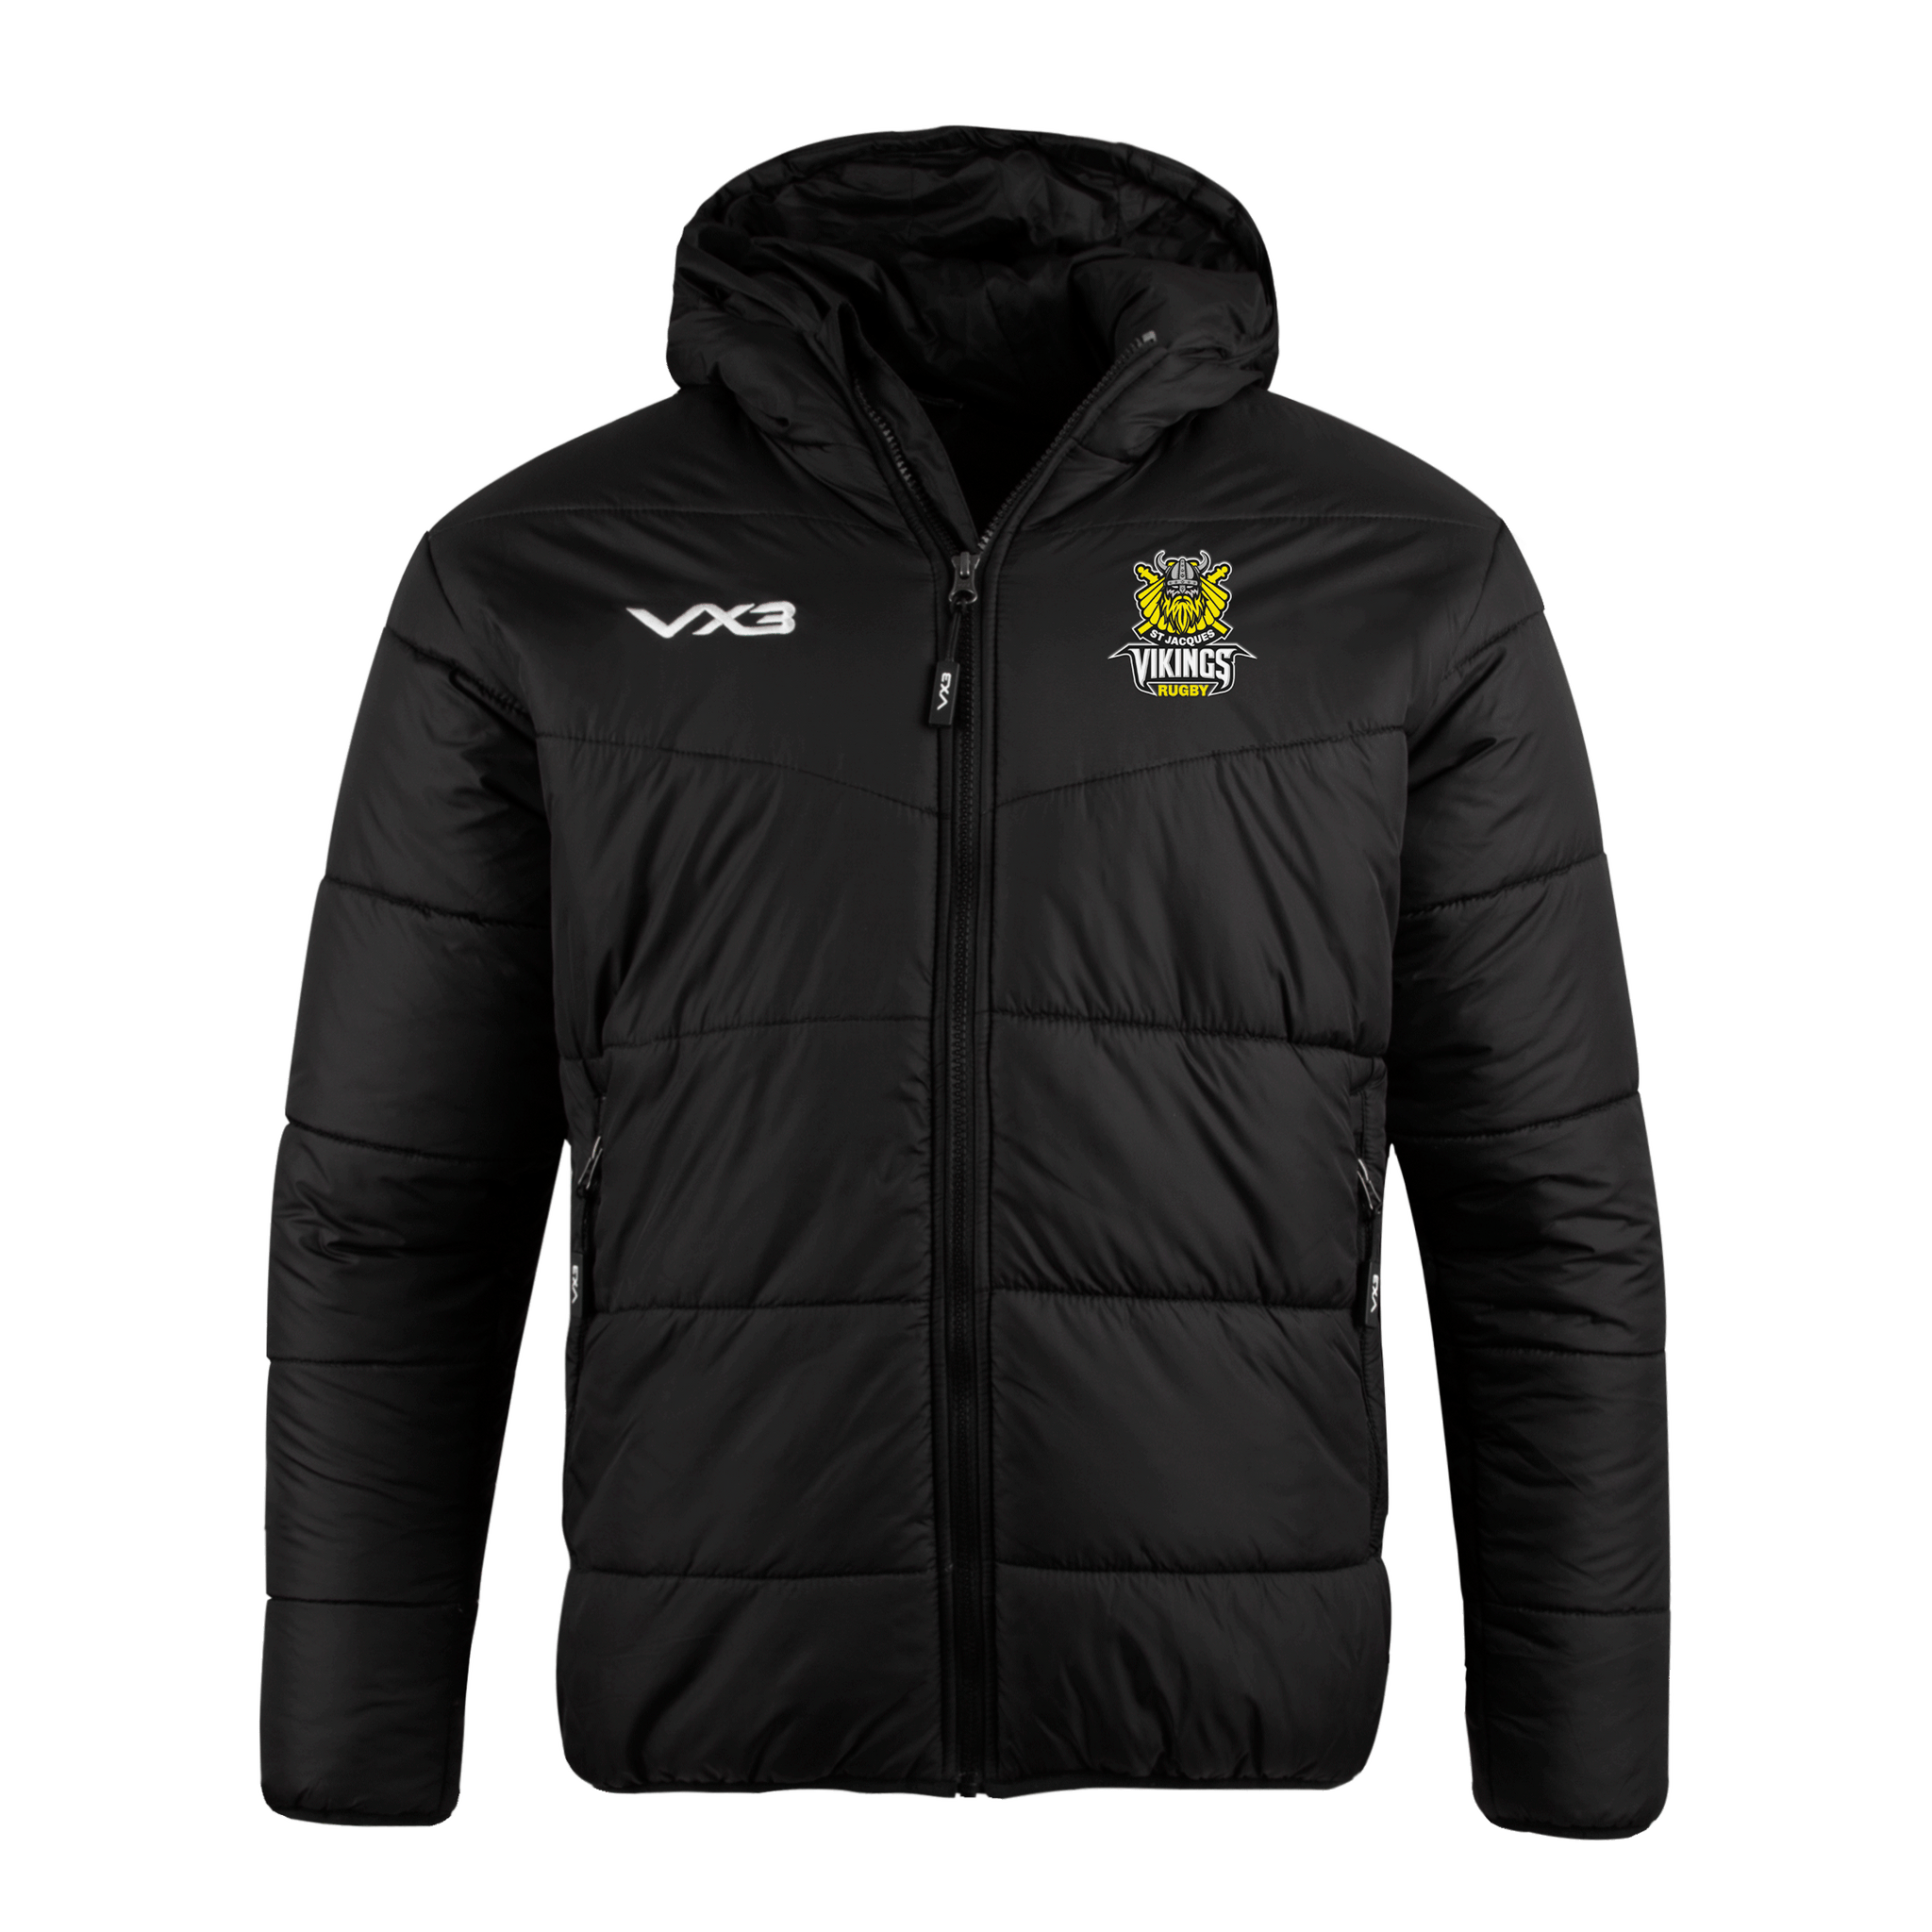 St Jacques Vikings Rugby Lorica Ladies Quilted Jacket